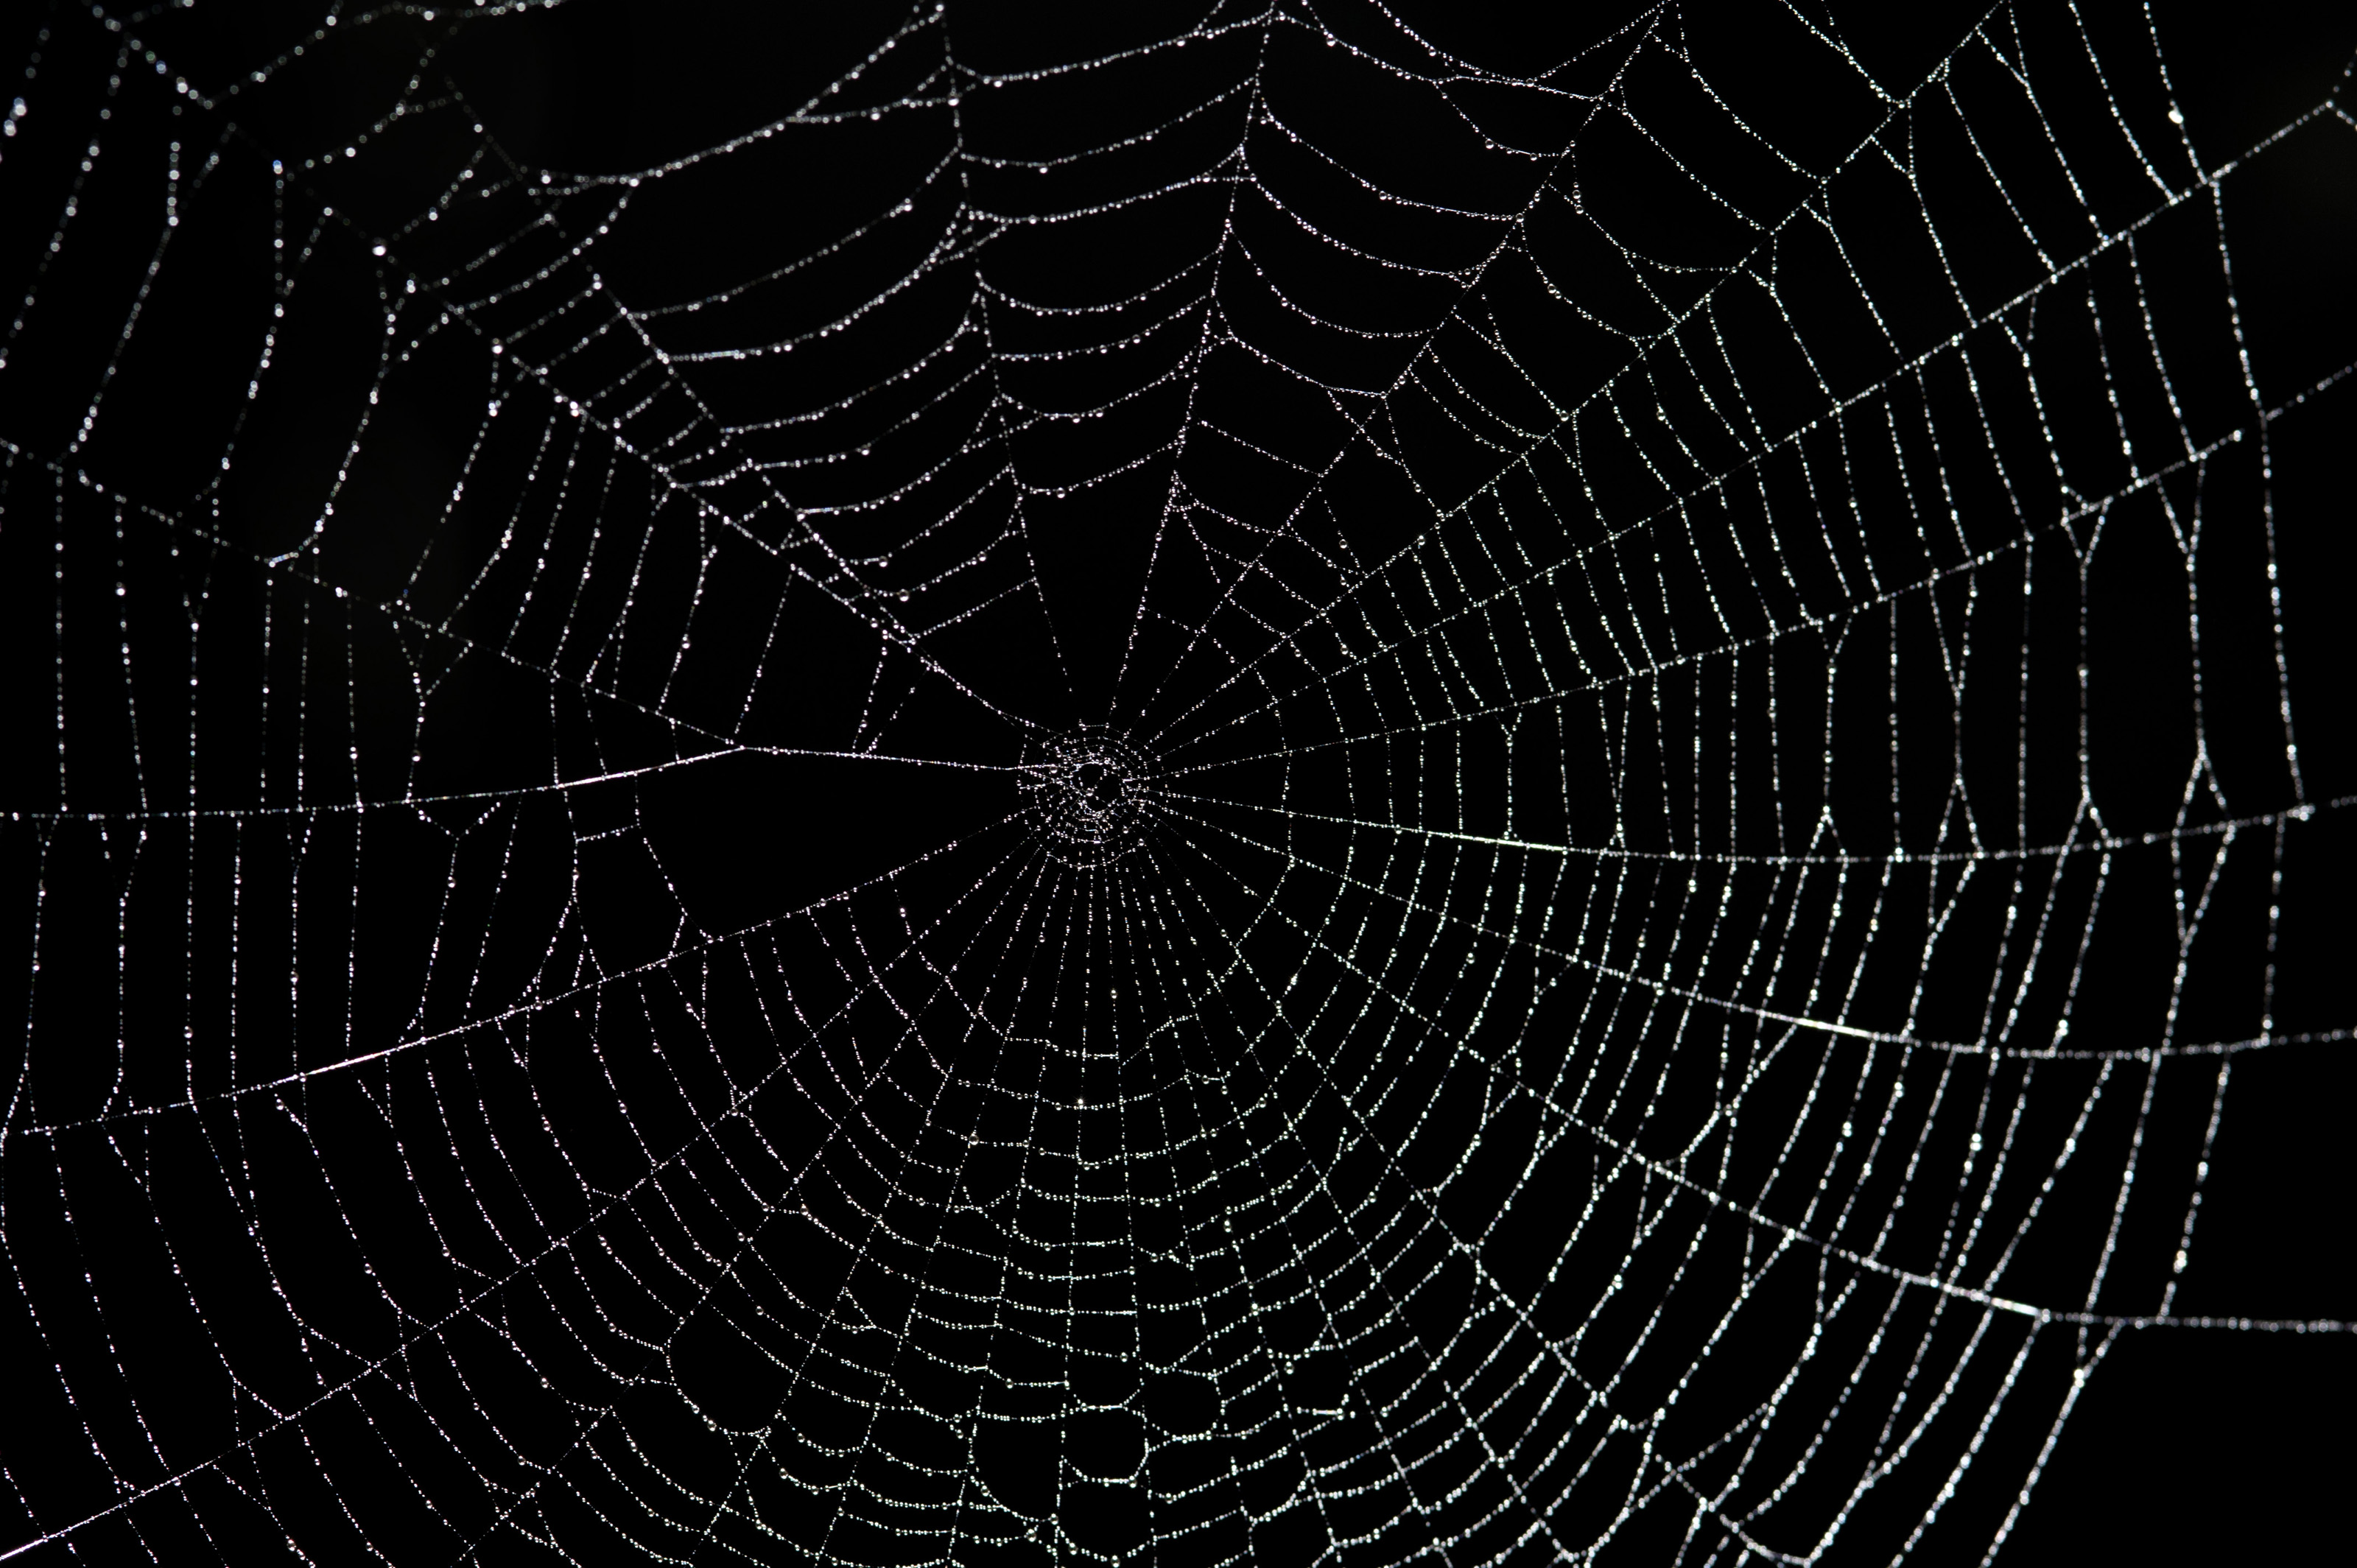 Photography Spider Web wallpapers (Desktop, Phone, Tablet) - Awesome ...